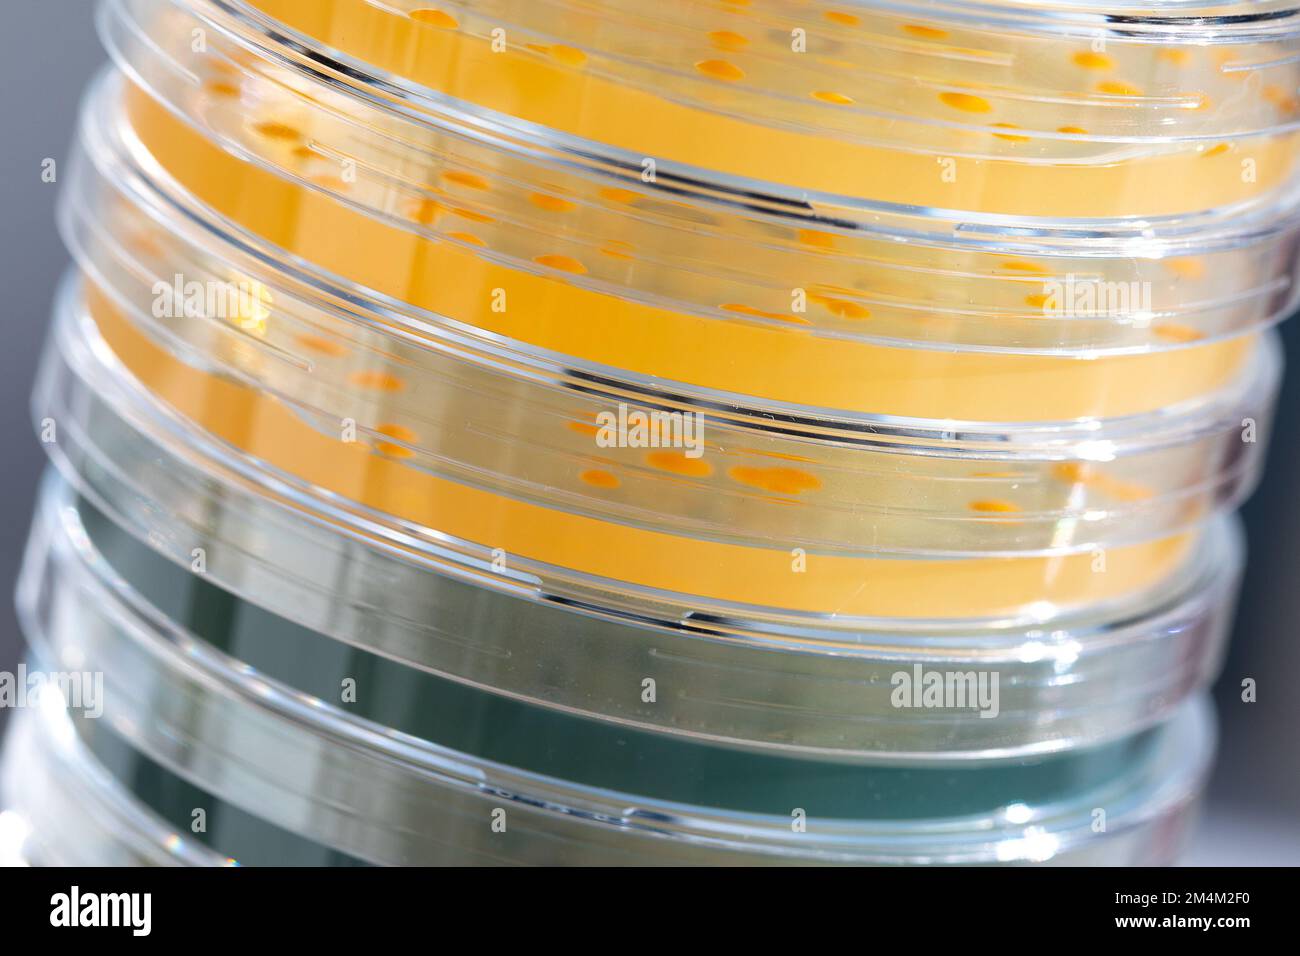 Laboratory experiment with close-up of a pile of Petri dishes with cultures of microorganisms to be analyzed. Growth in colored agar medium Stock Photo